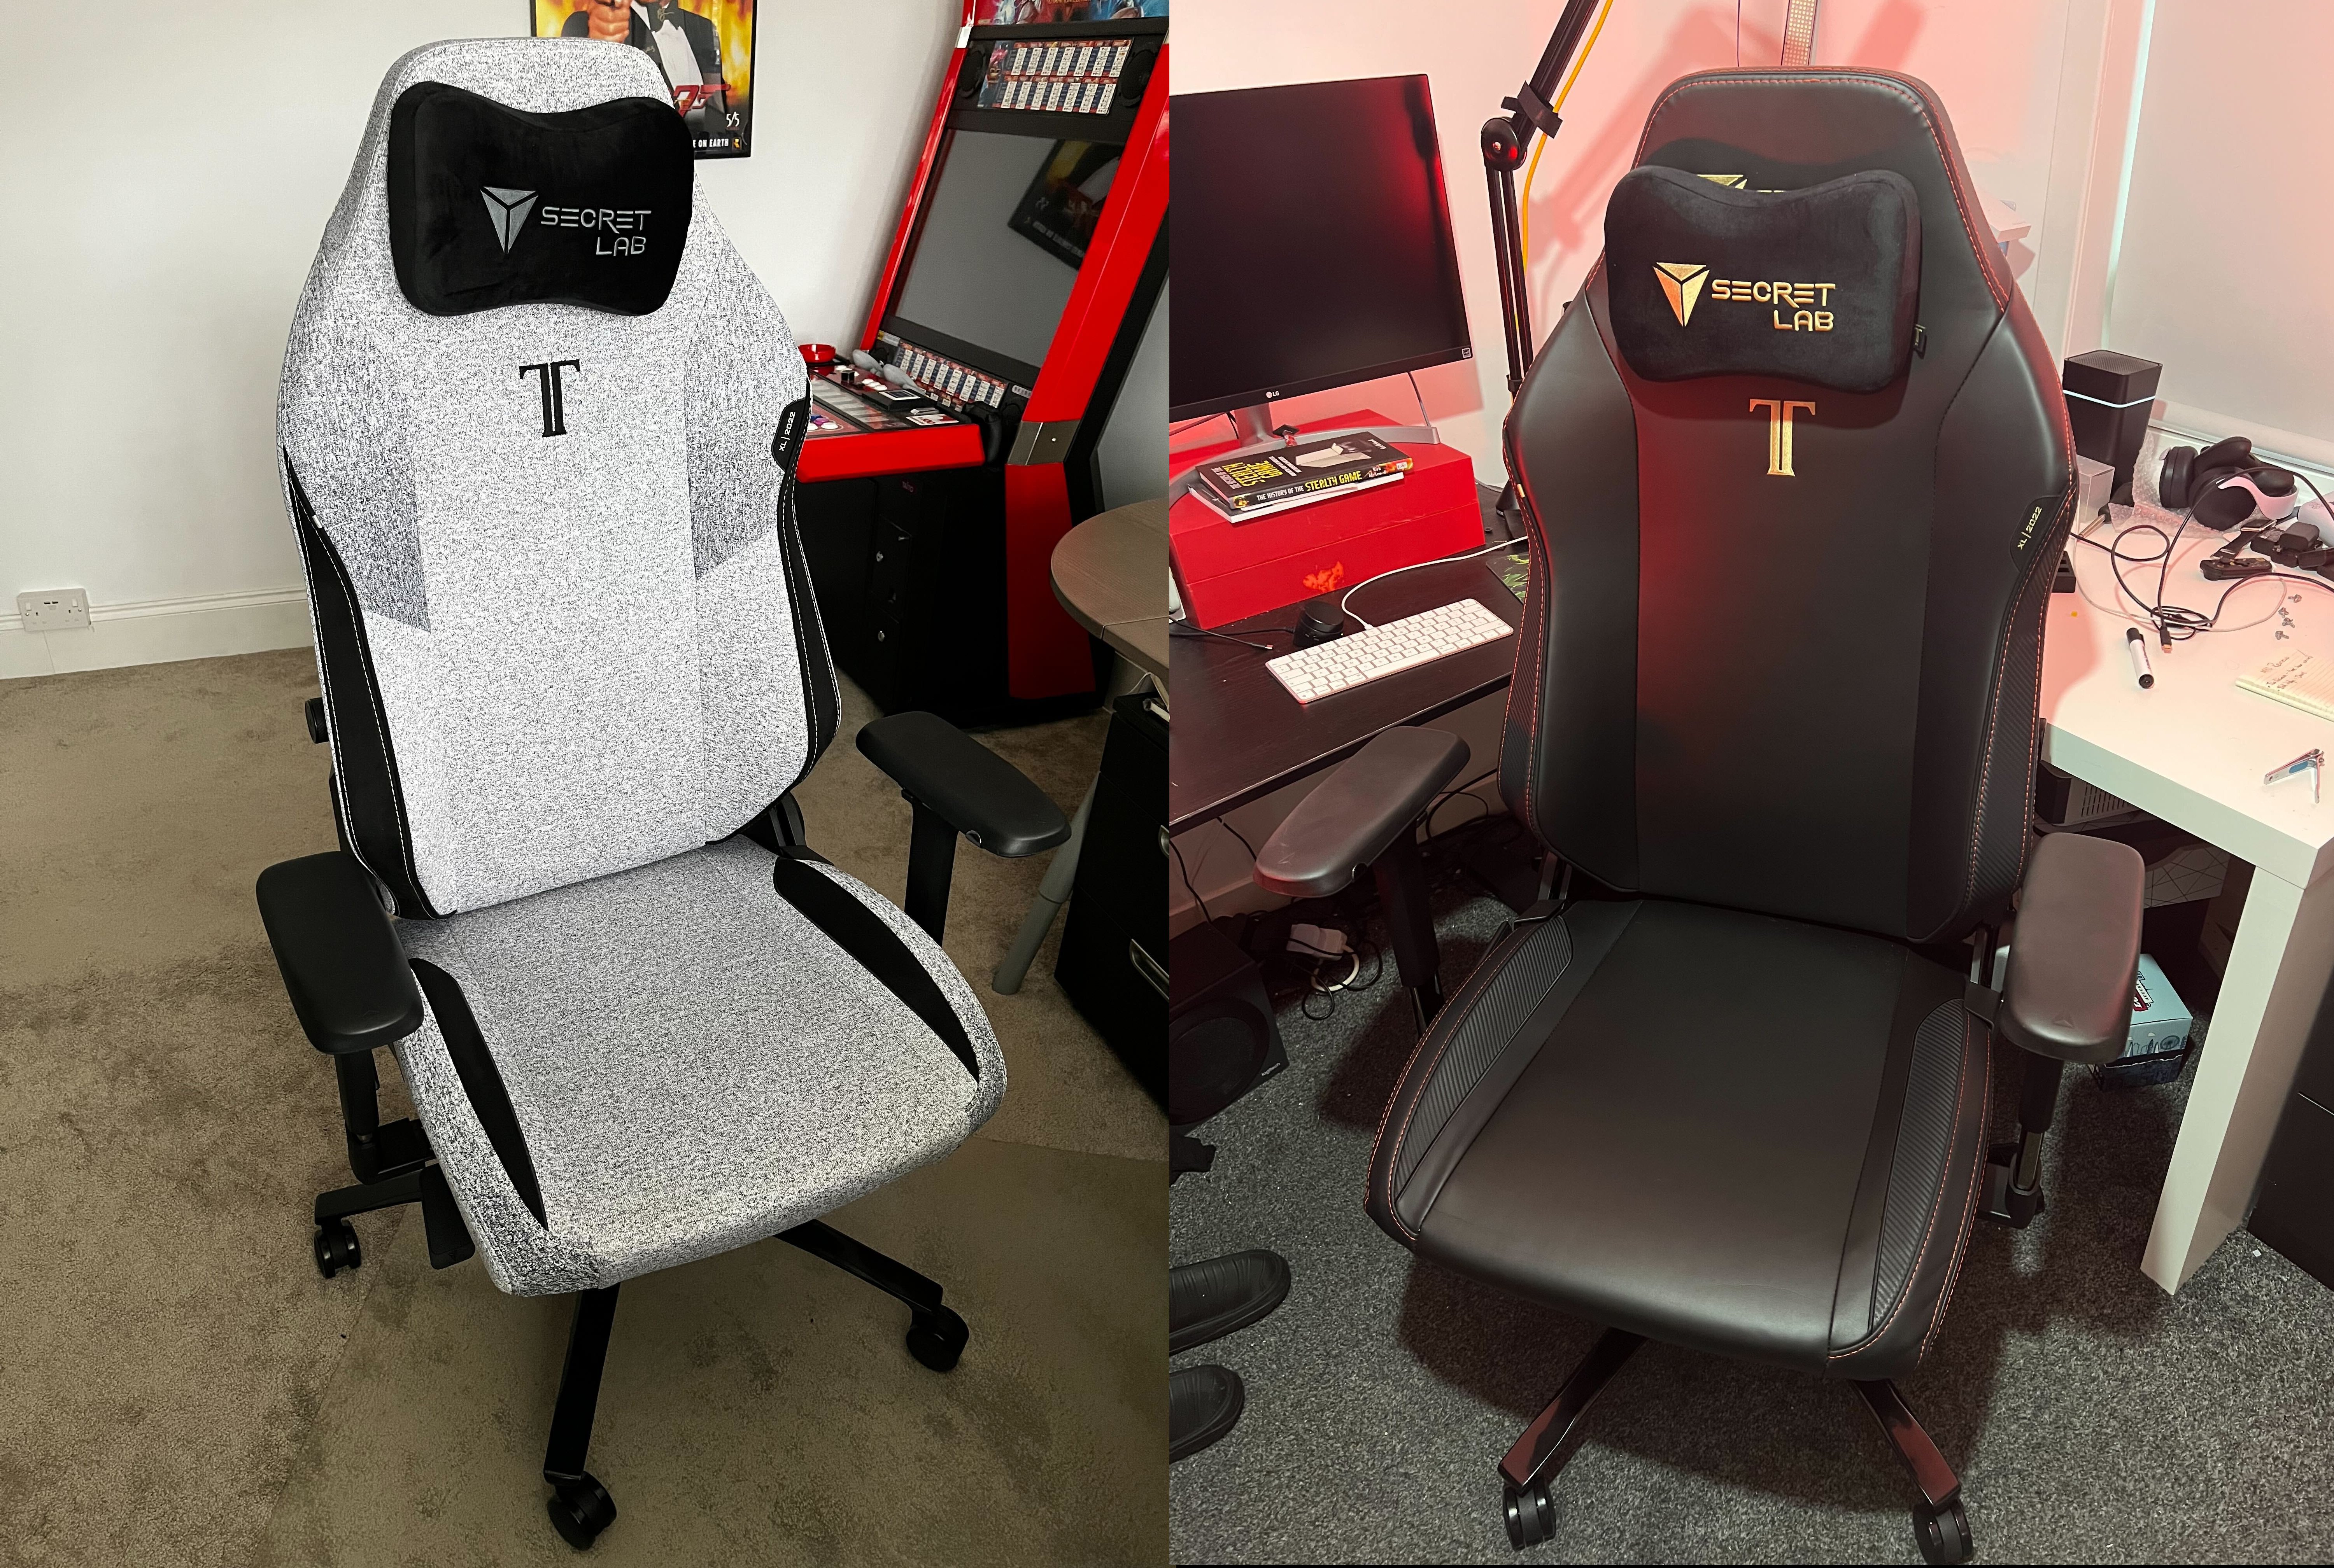 Review: Secretlab’s Titan Evo 2022 sits comfortably on the top tier of gaming chairs